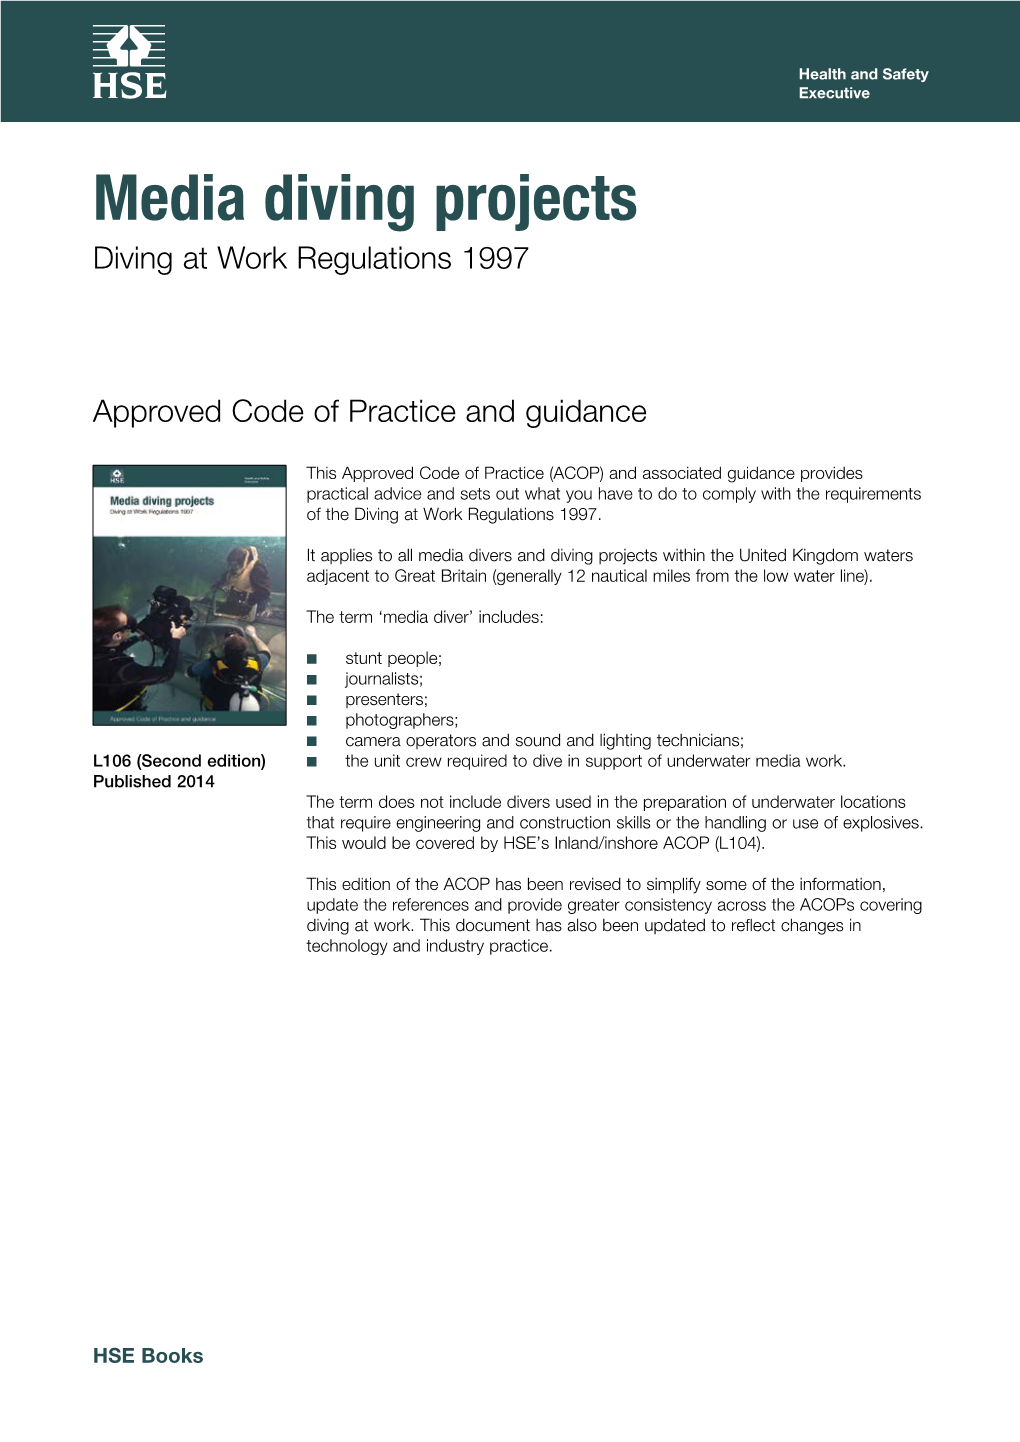 Media Diving Projects. Diving at Work Regulations 1997. Approved Code